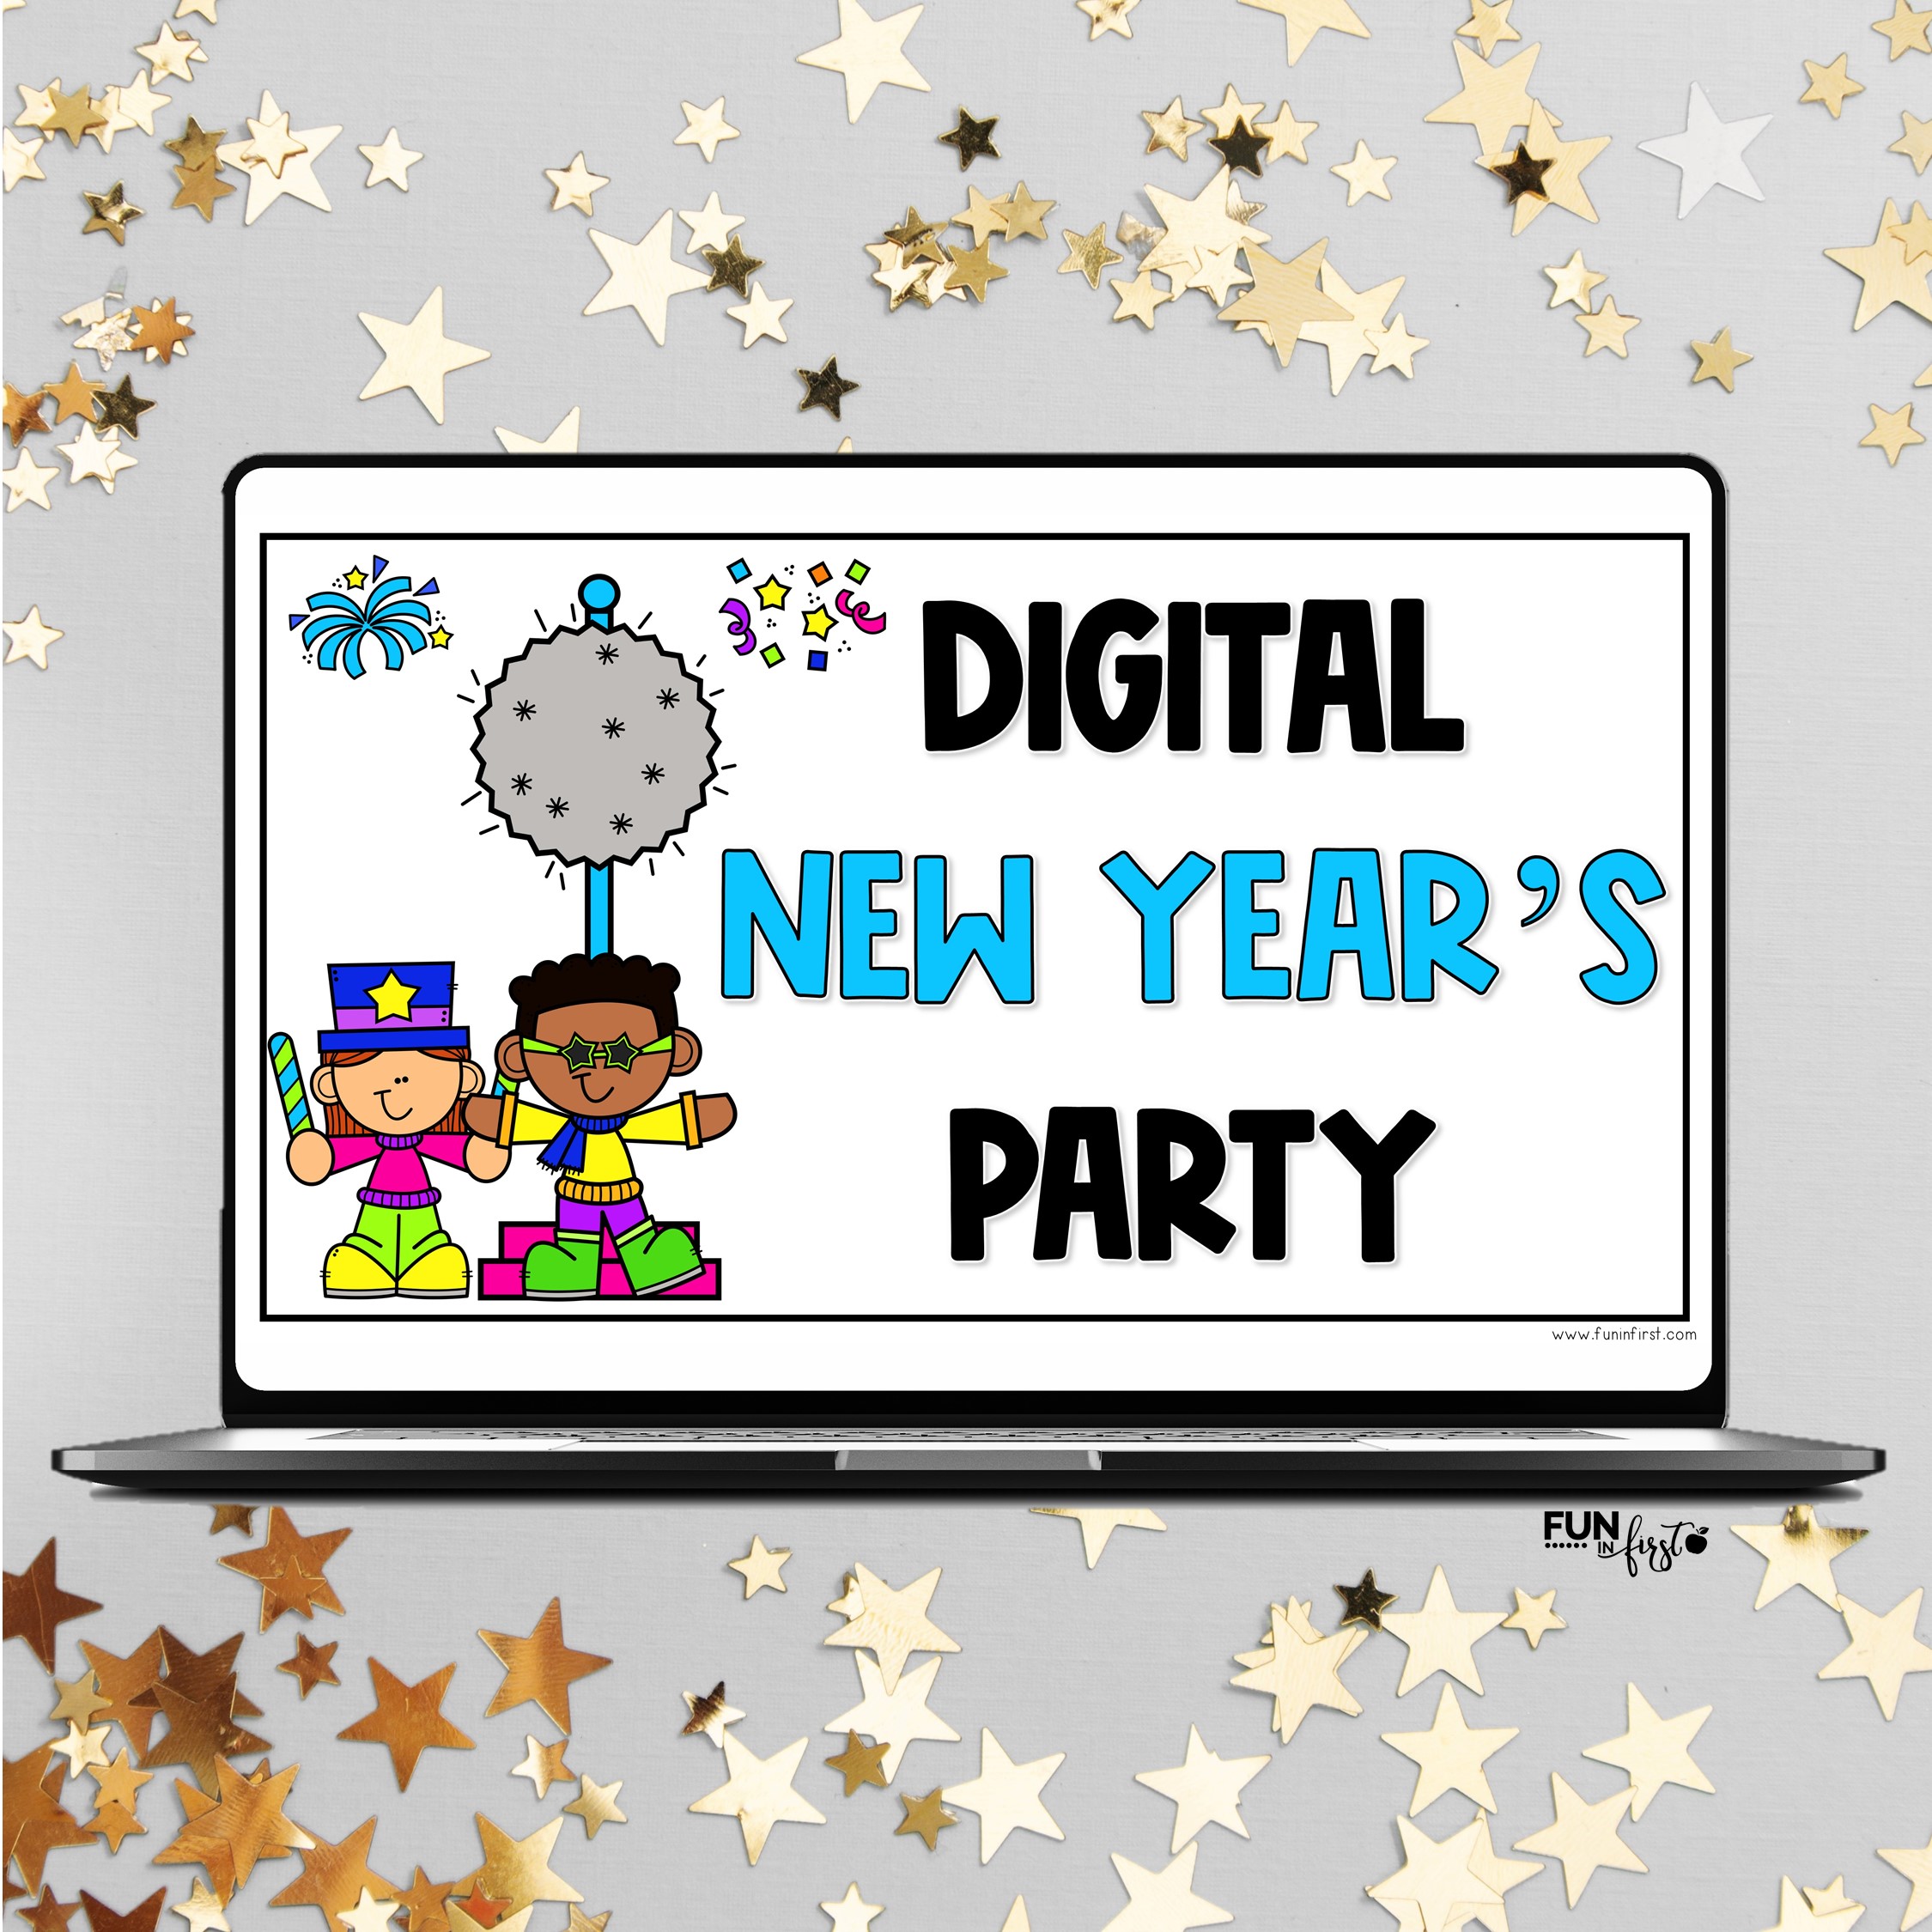 Ringing in the New Year with Digital Activities